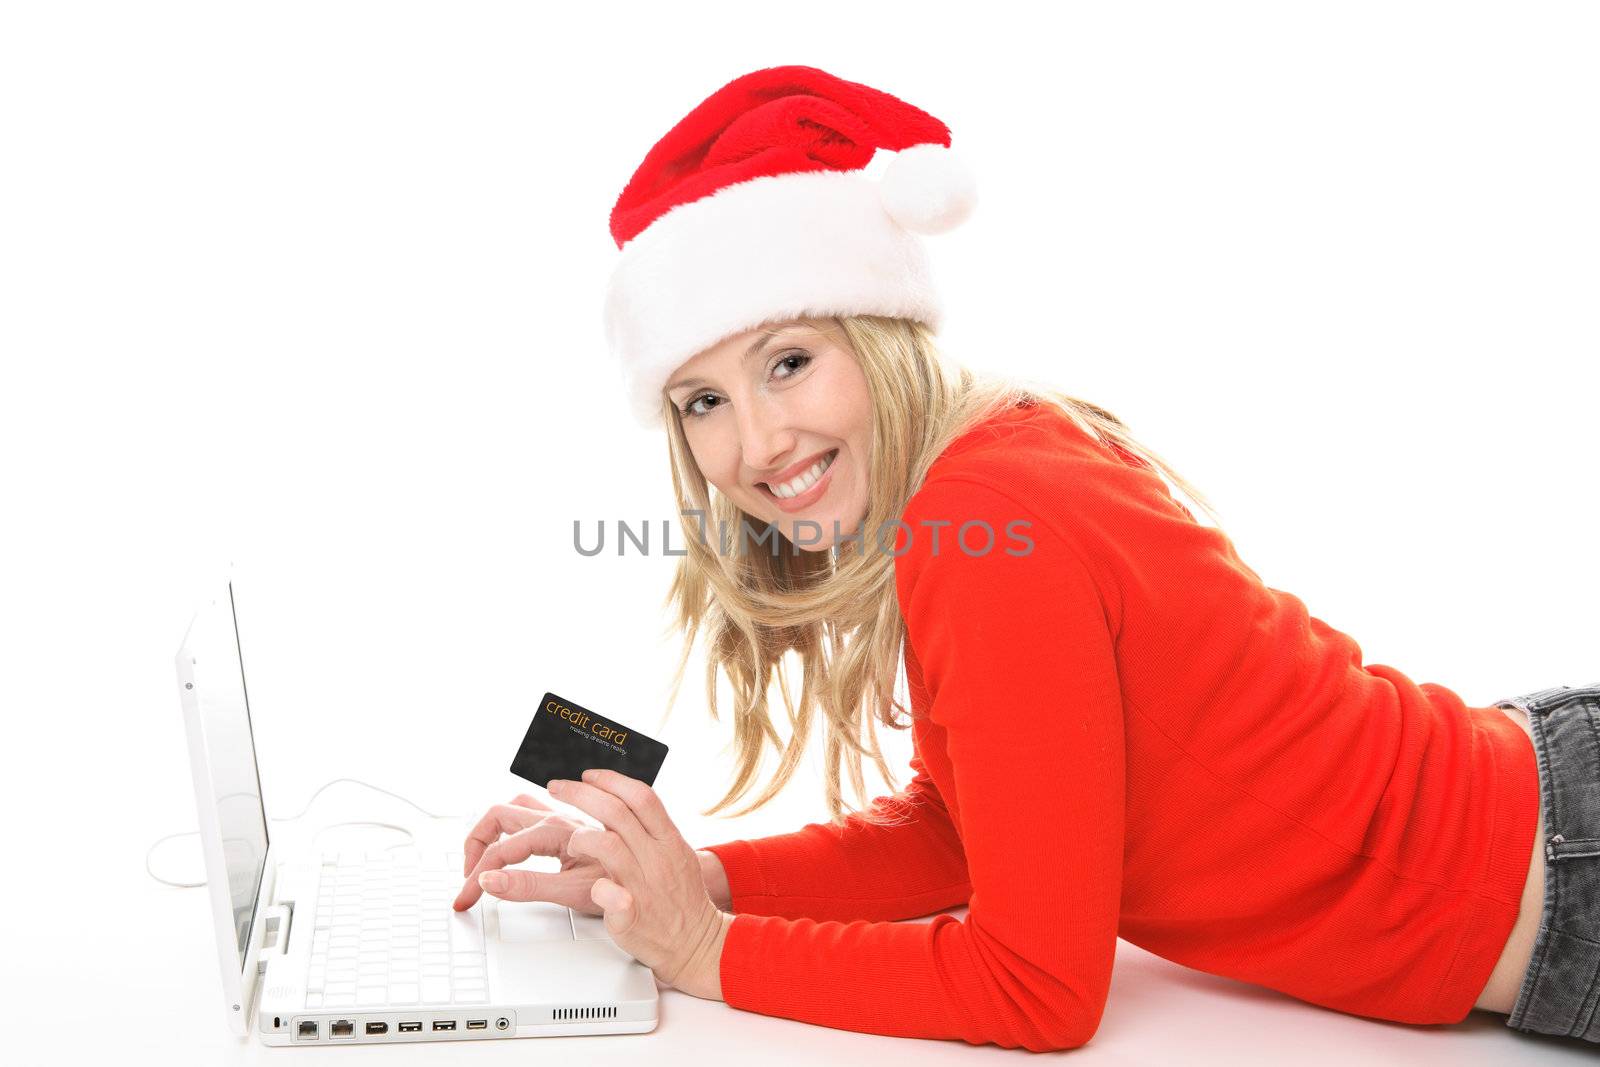 Girl using a card to shop safely  online.  She has a card in one hand and is looking up and smiling.  Change the text or add in your own card or credit card.